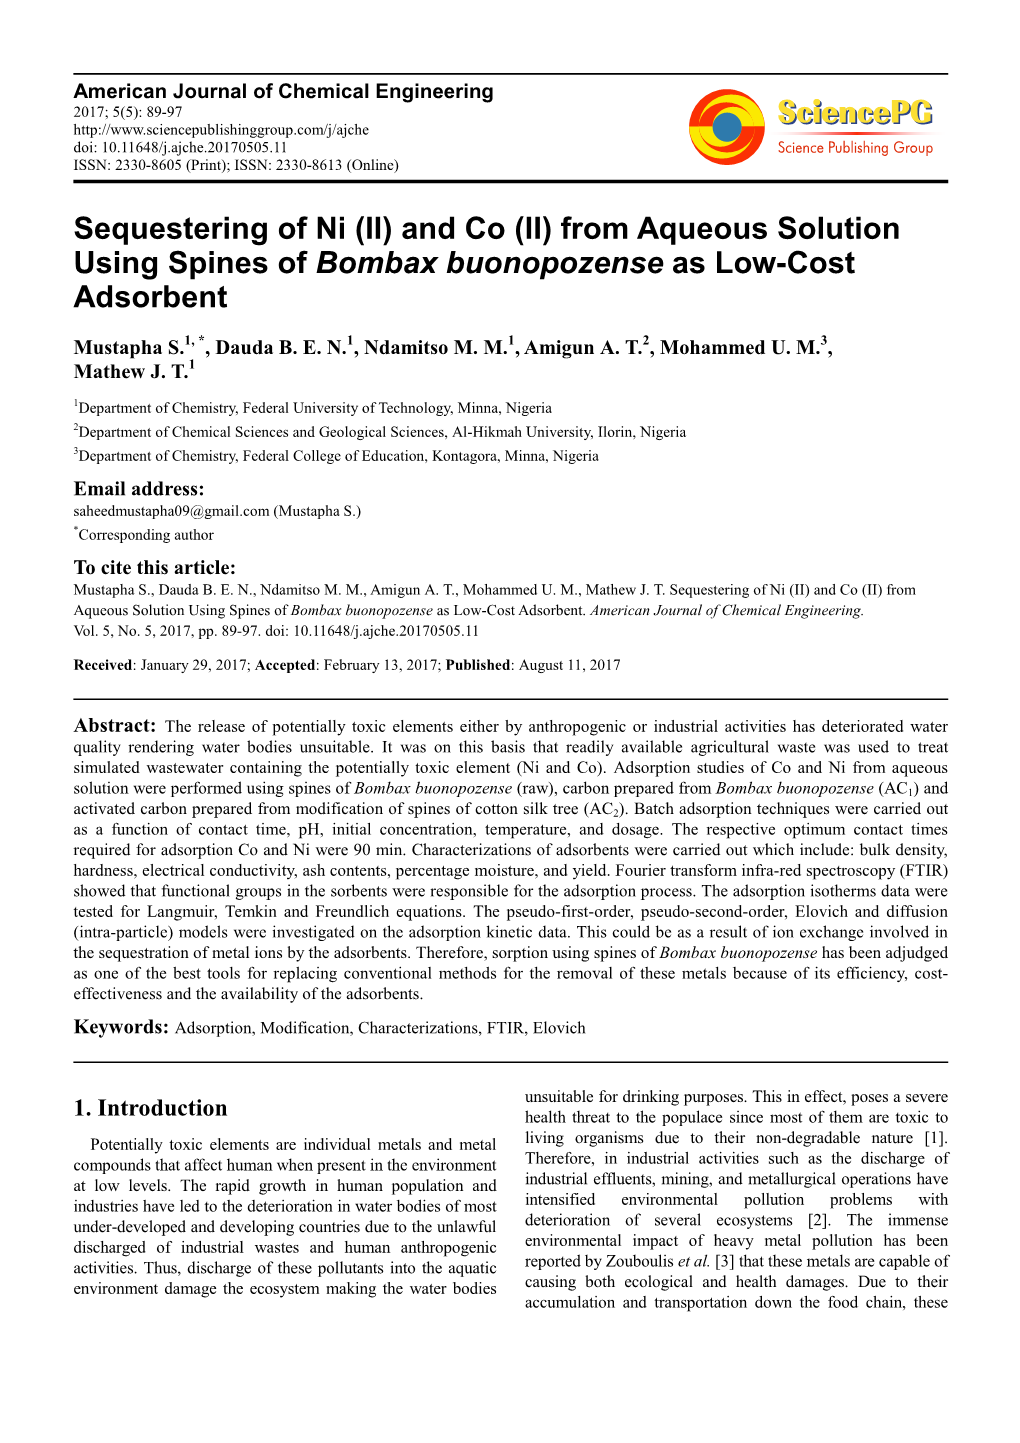 From Aqueous Solution Using Spines of Bombax Buonopozense As Low-Cost Adsorbent